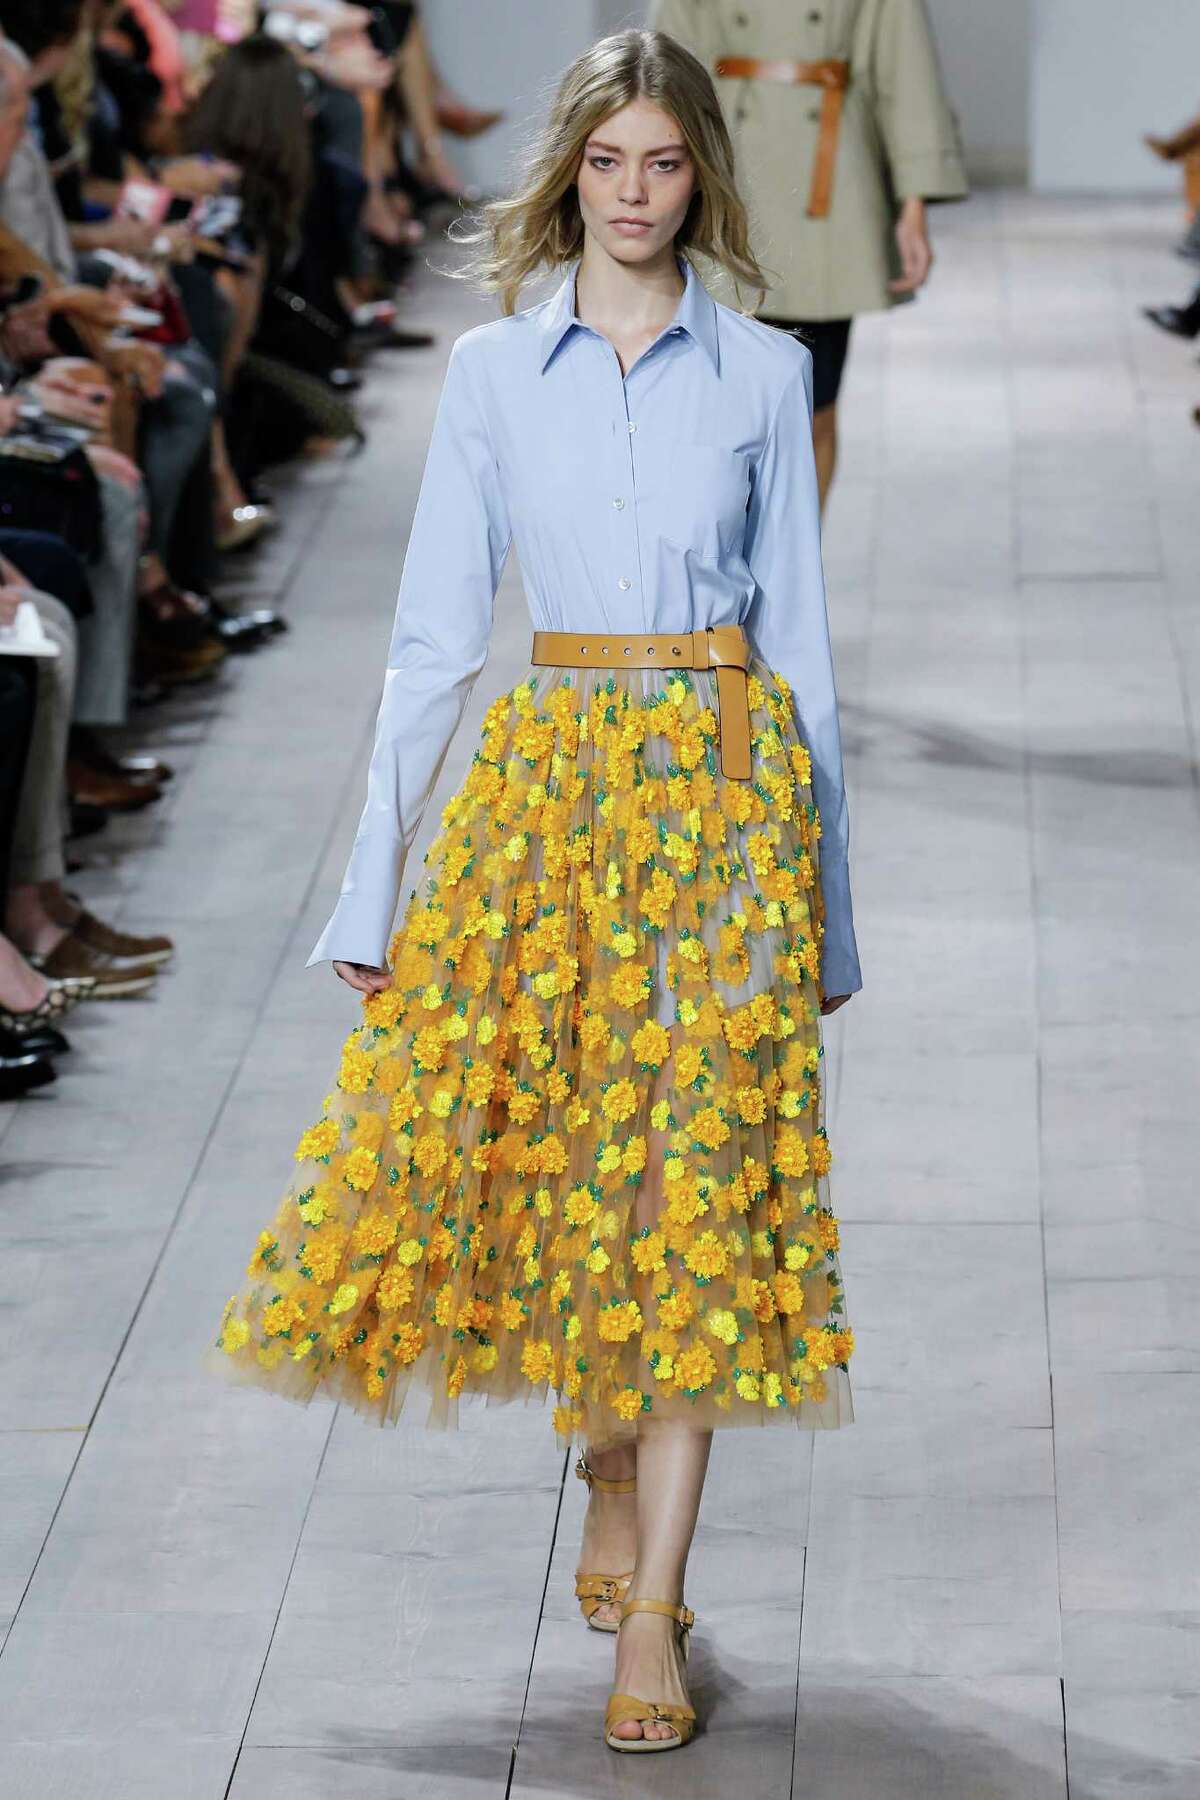 Floral prints, big and small, are an important spring 2015 trend as seen in this look from Michael Kors.